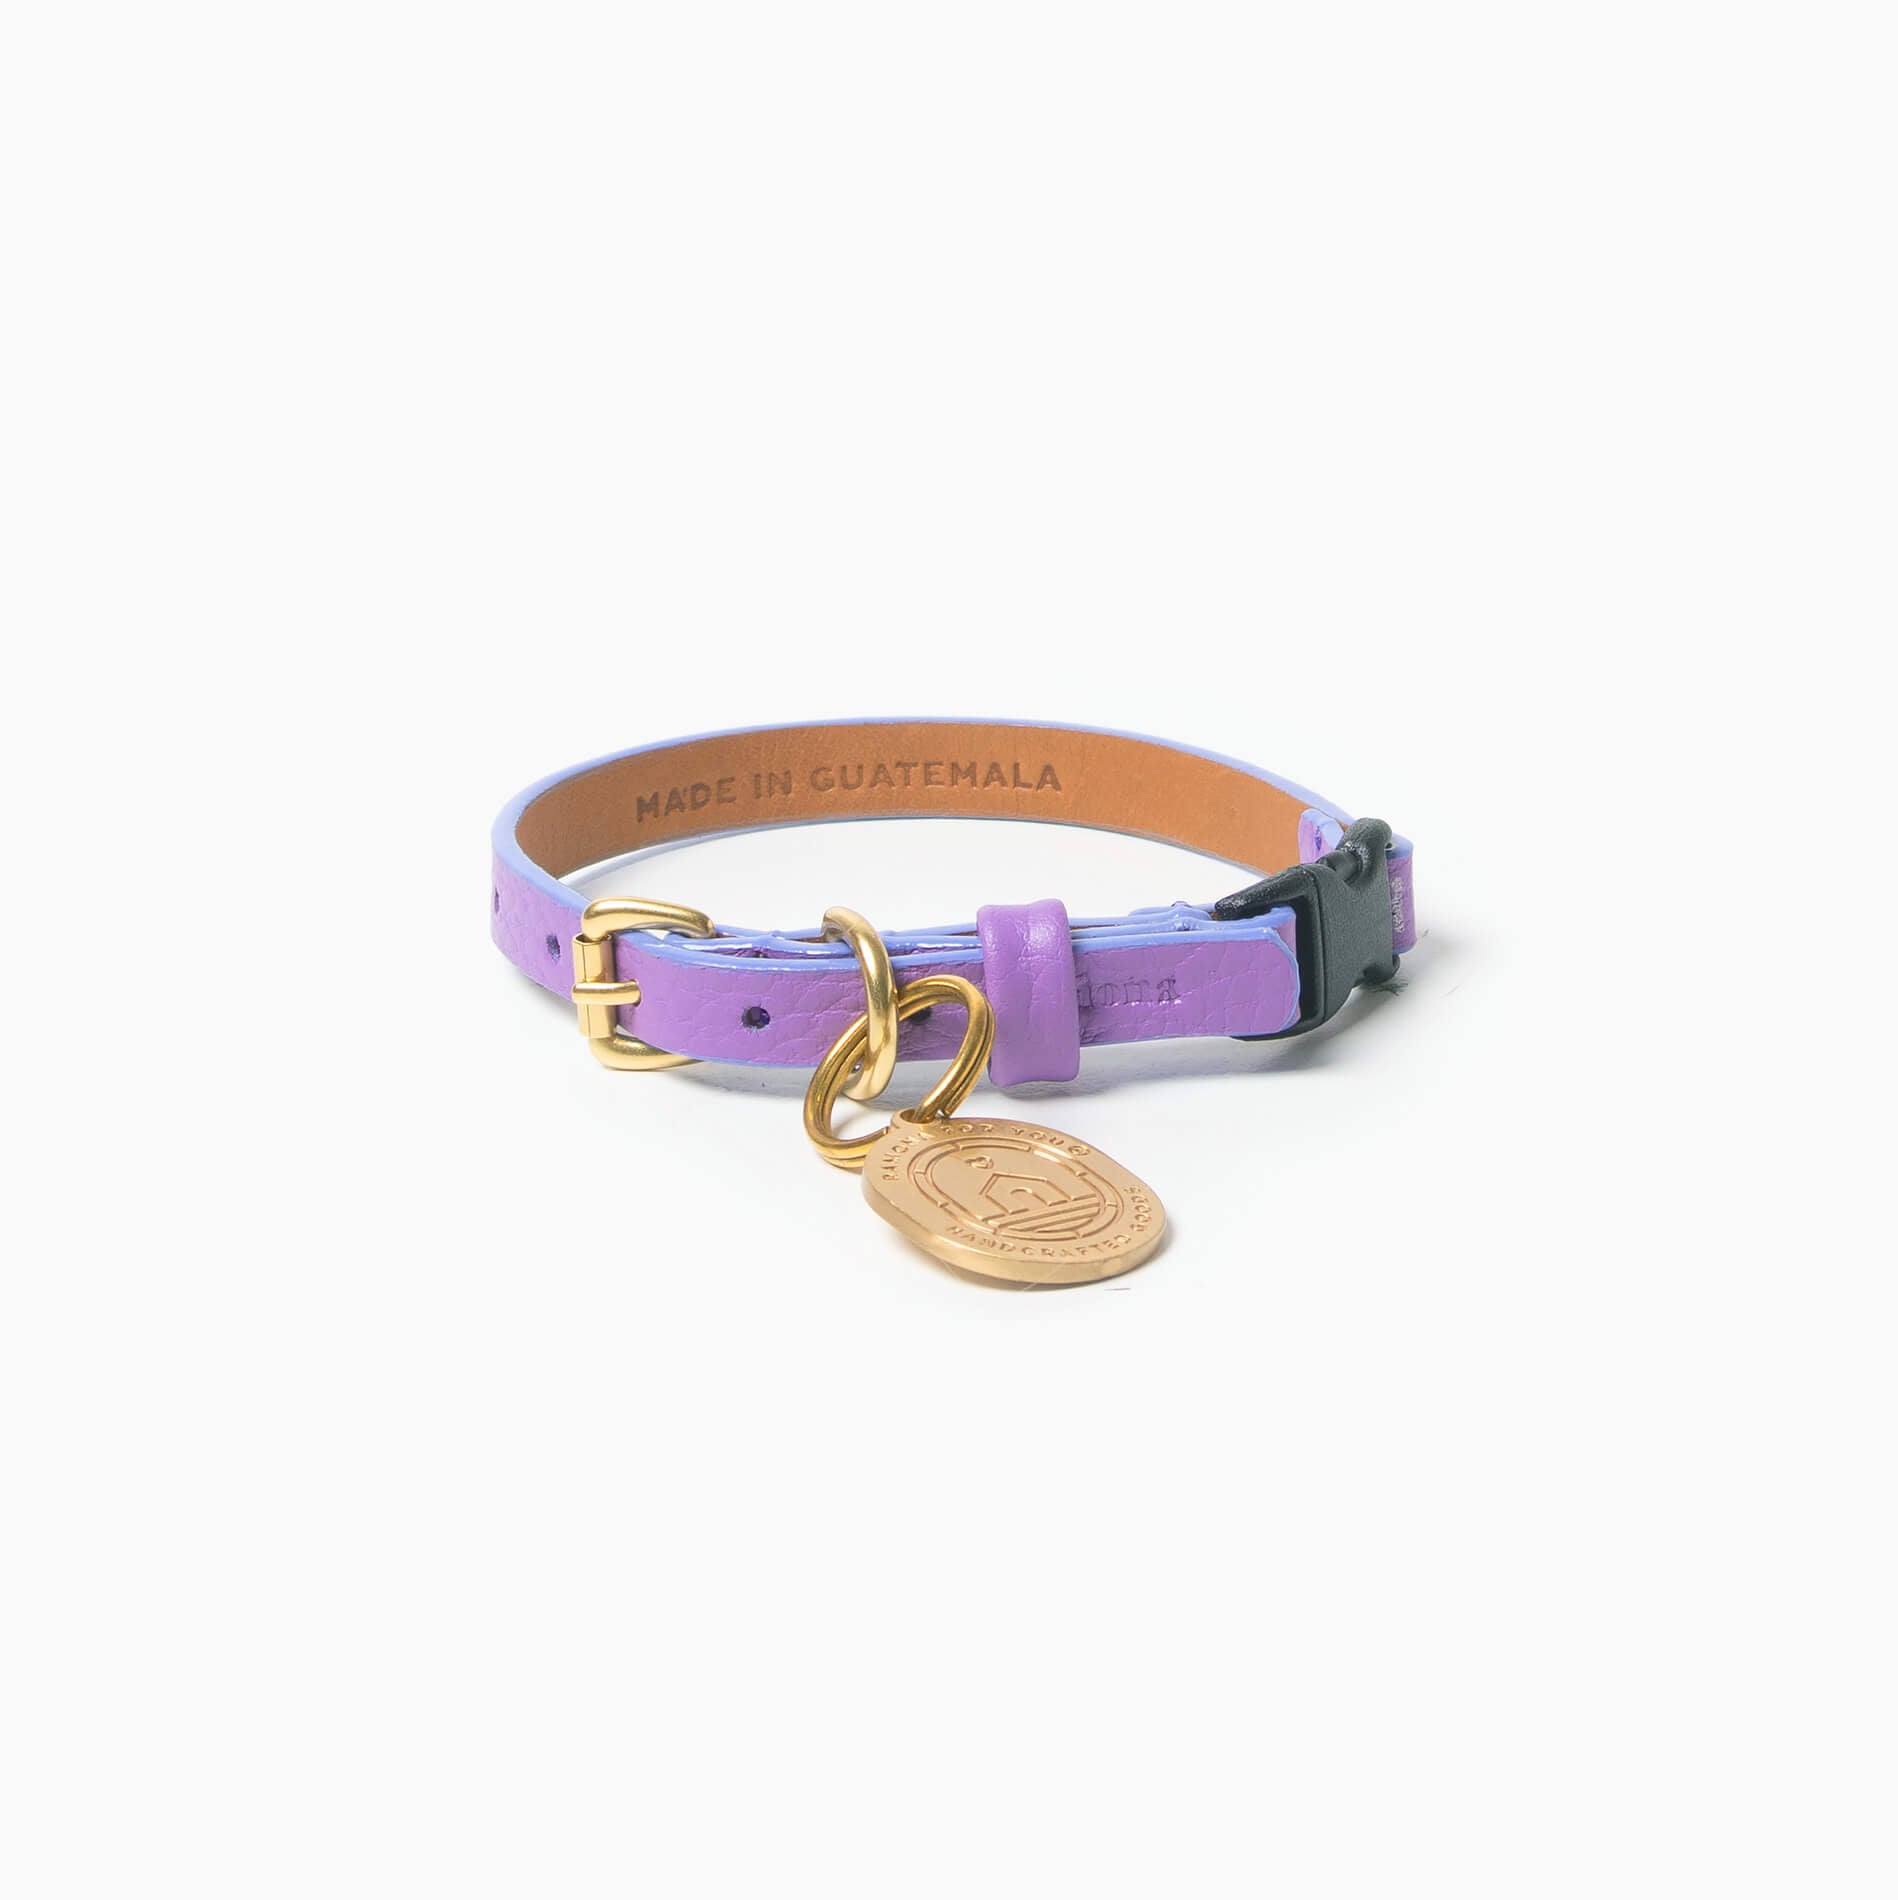 Lilac leather cat collar with tag ID and security clip. Handcreafted leather kitty collar.